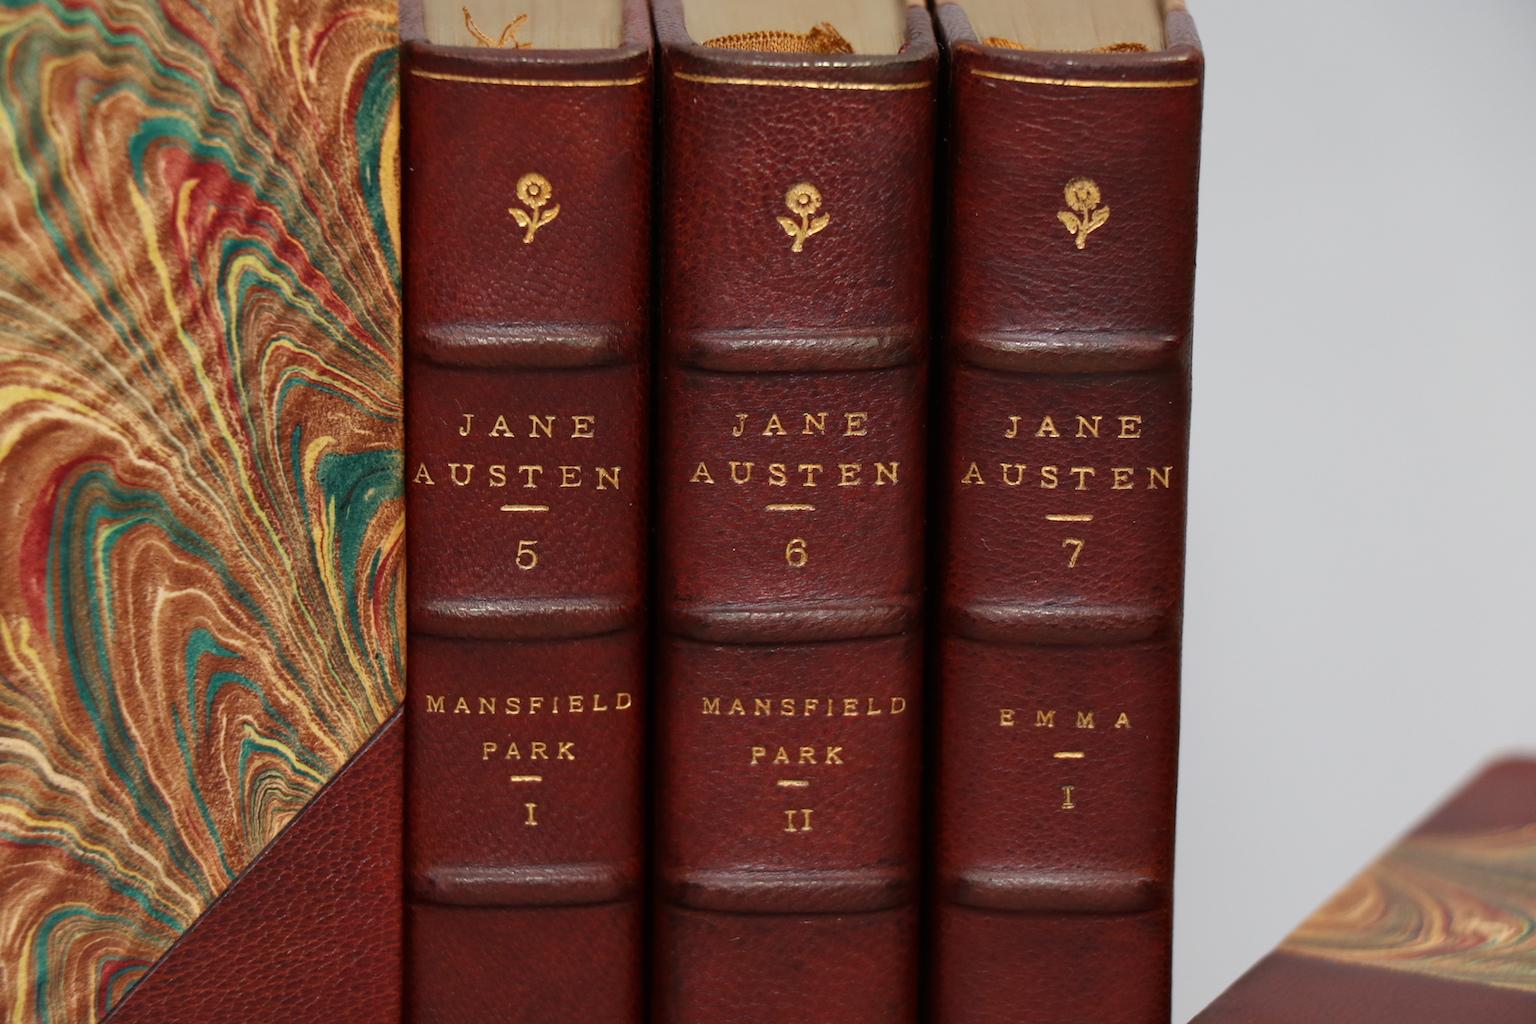 Dyed Books, The Novels of Jane Austen, Edited by Brimley Johnson Winchester Edition